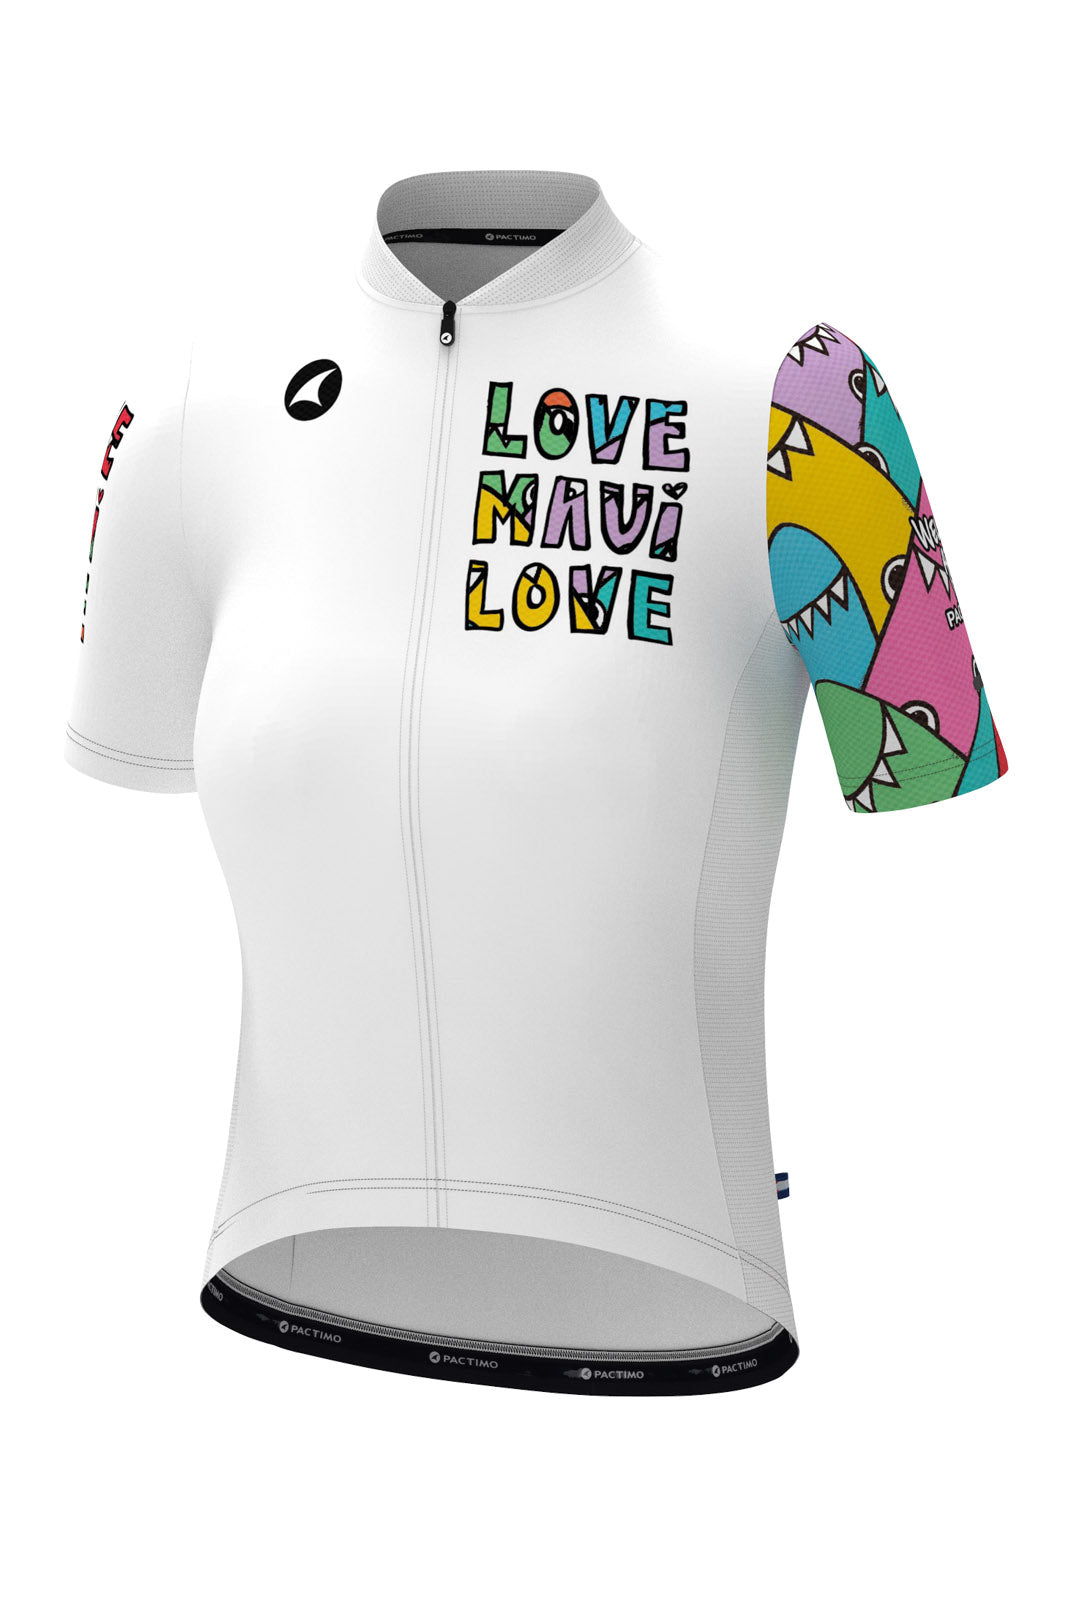 Maui Relief Cycling Jersey for Women - Welzie Design Front View